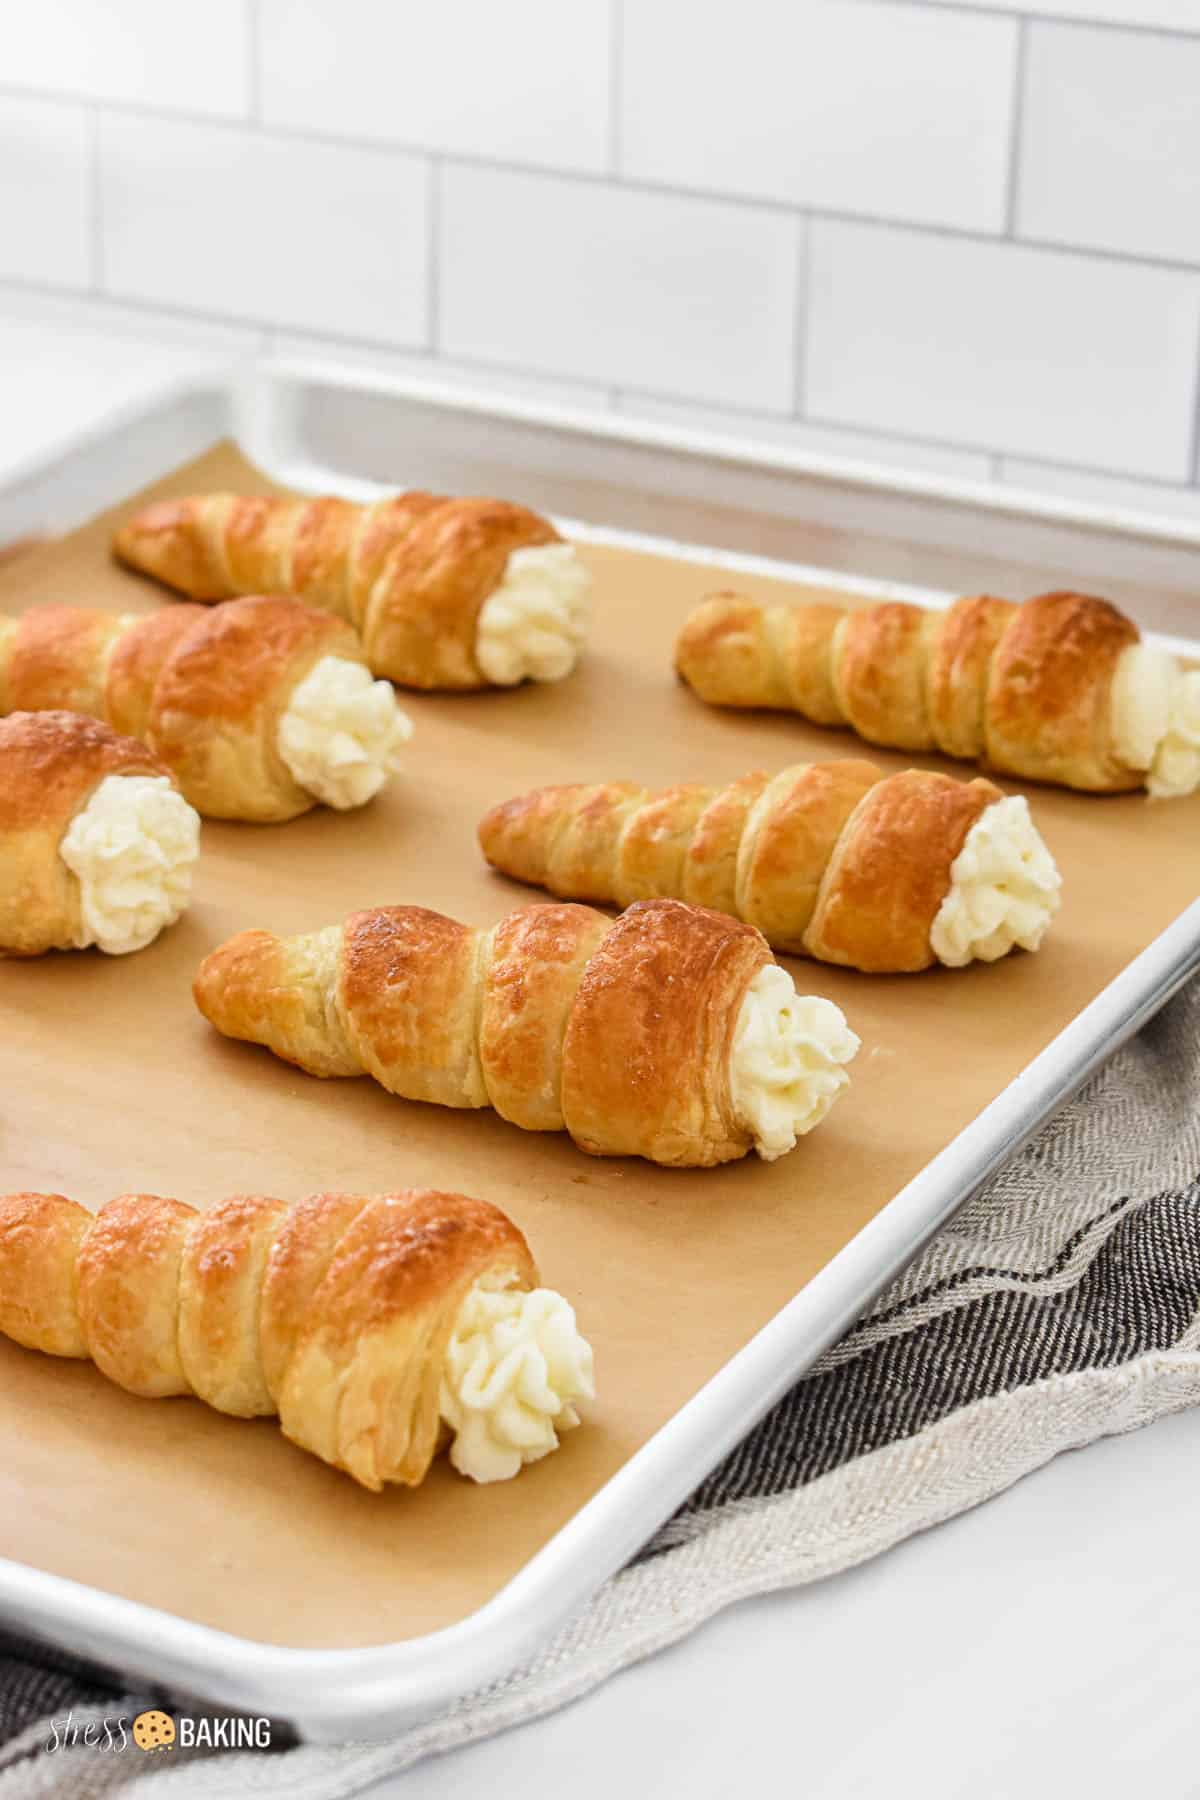 This is a photo of Homemade Cream Horns on a baking sheet ready to eat.